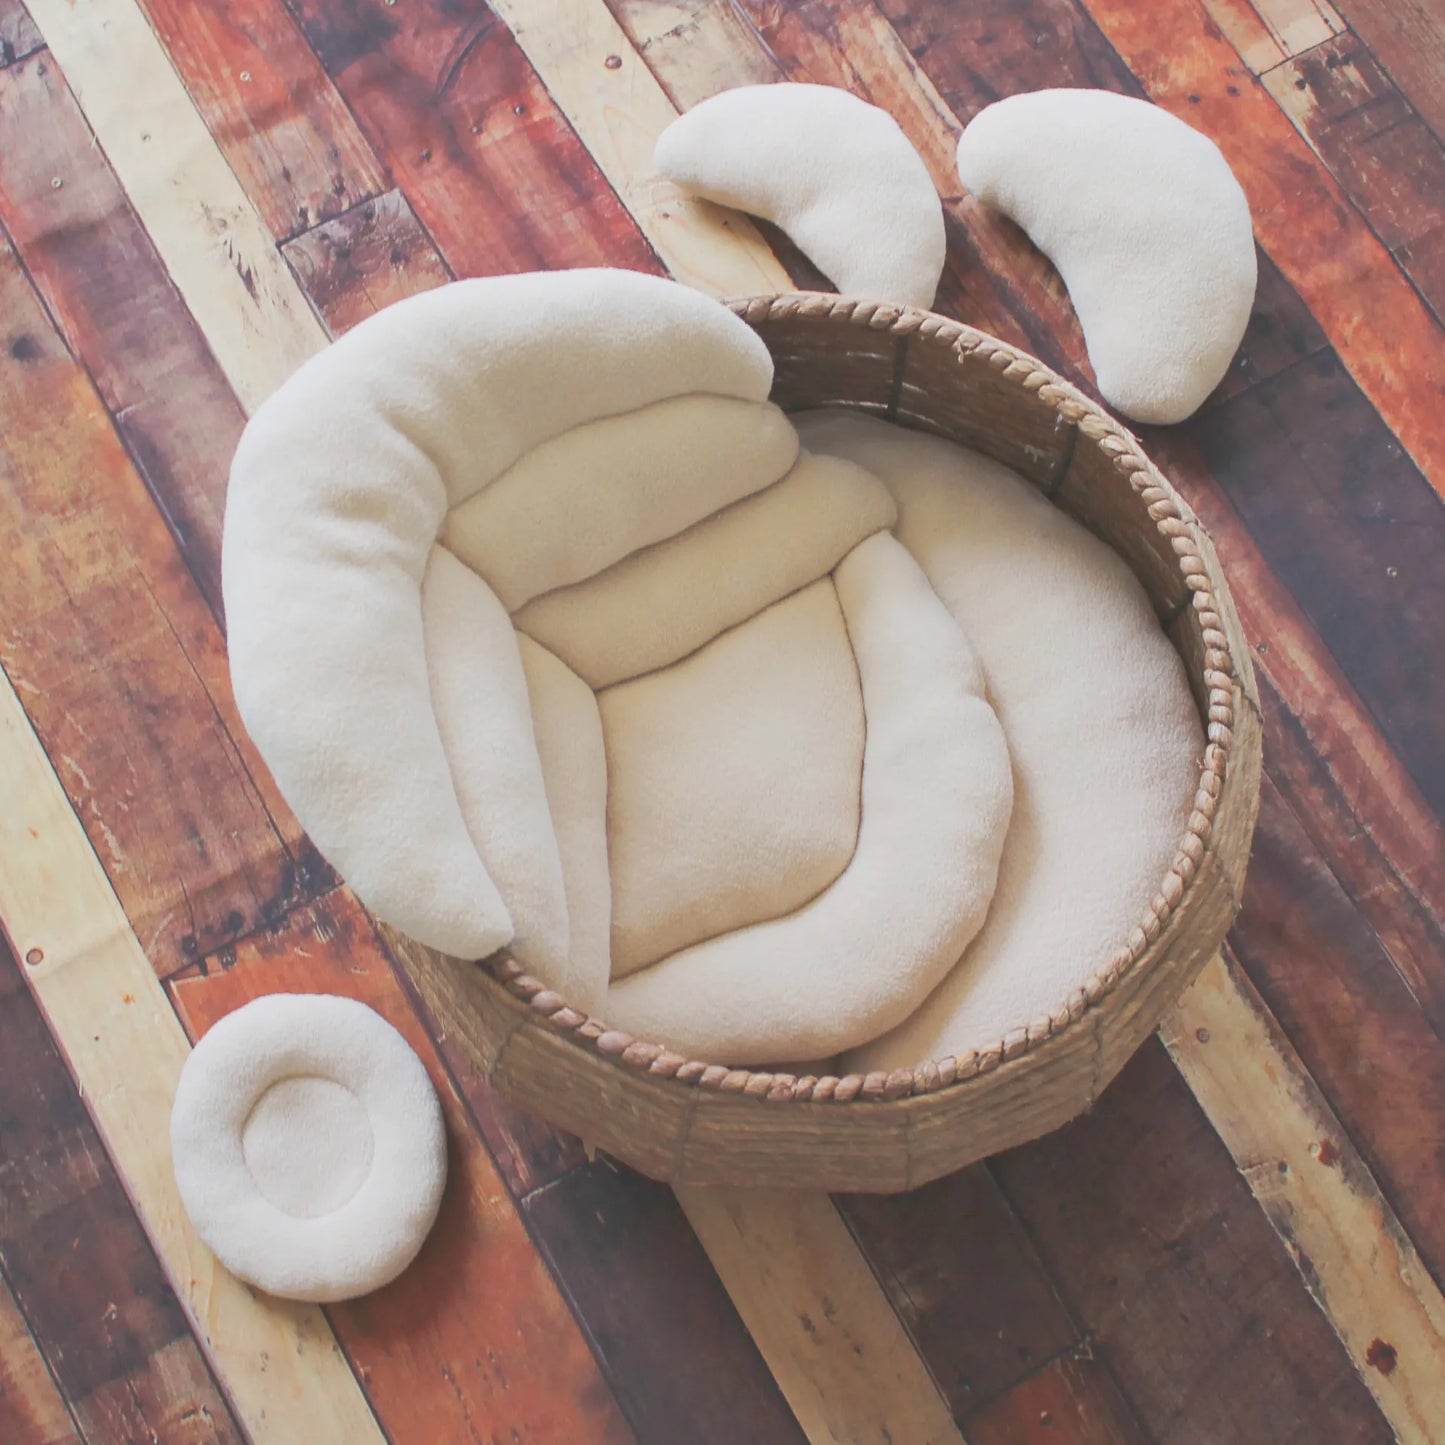 Soft Poser Pillow Pads for Newborn Photography